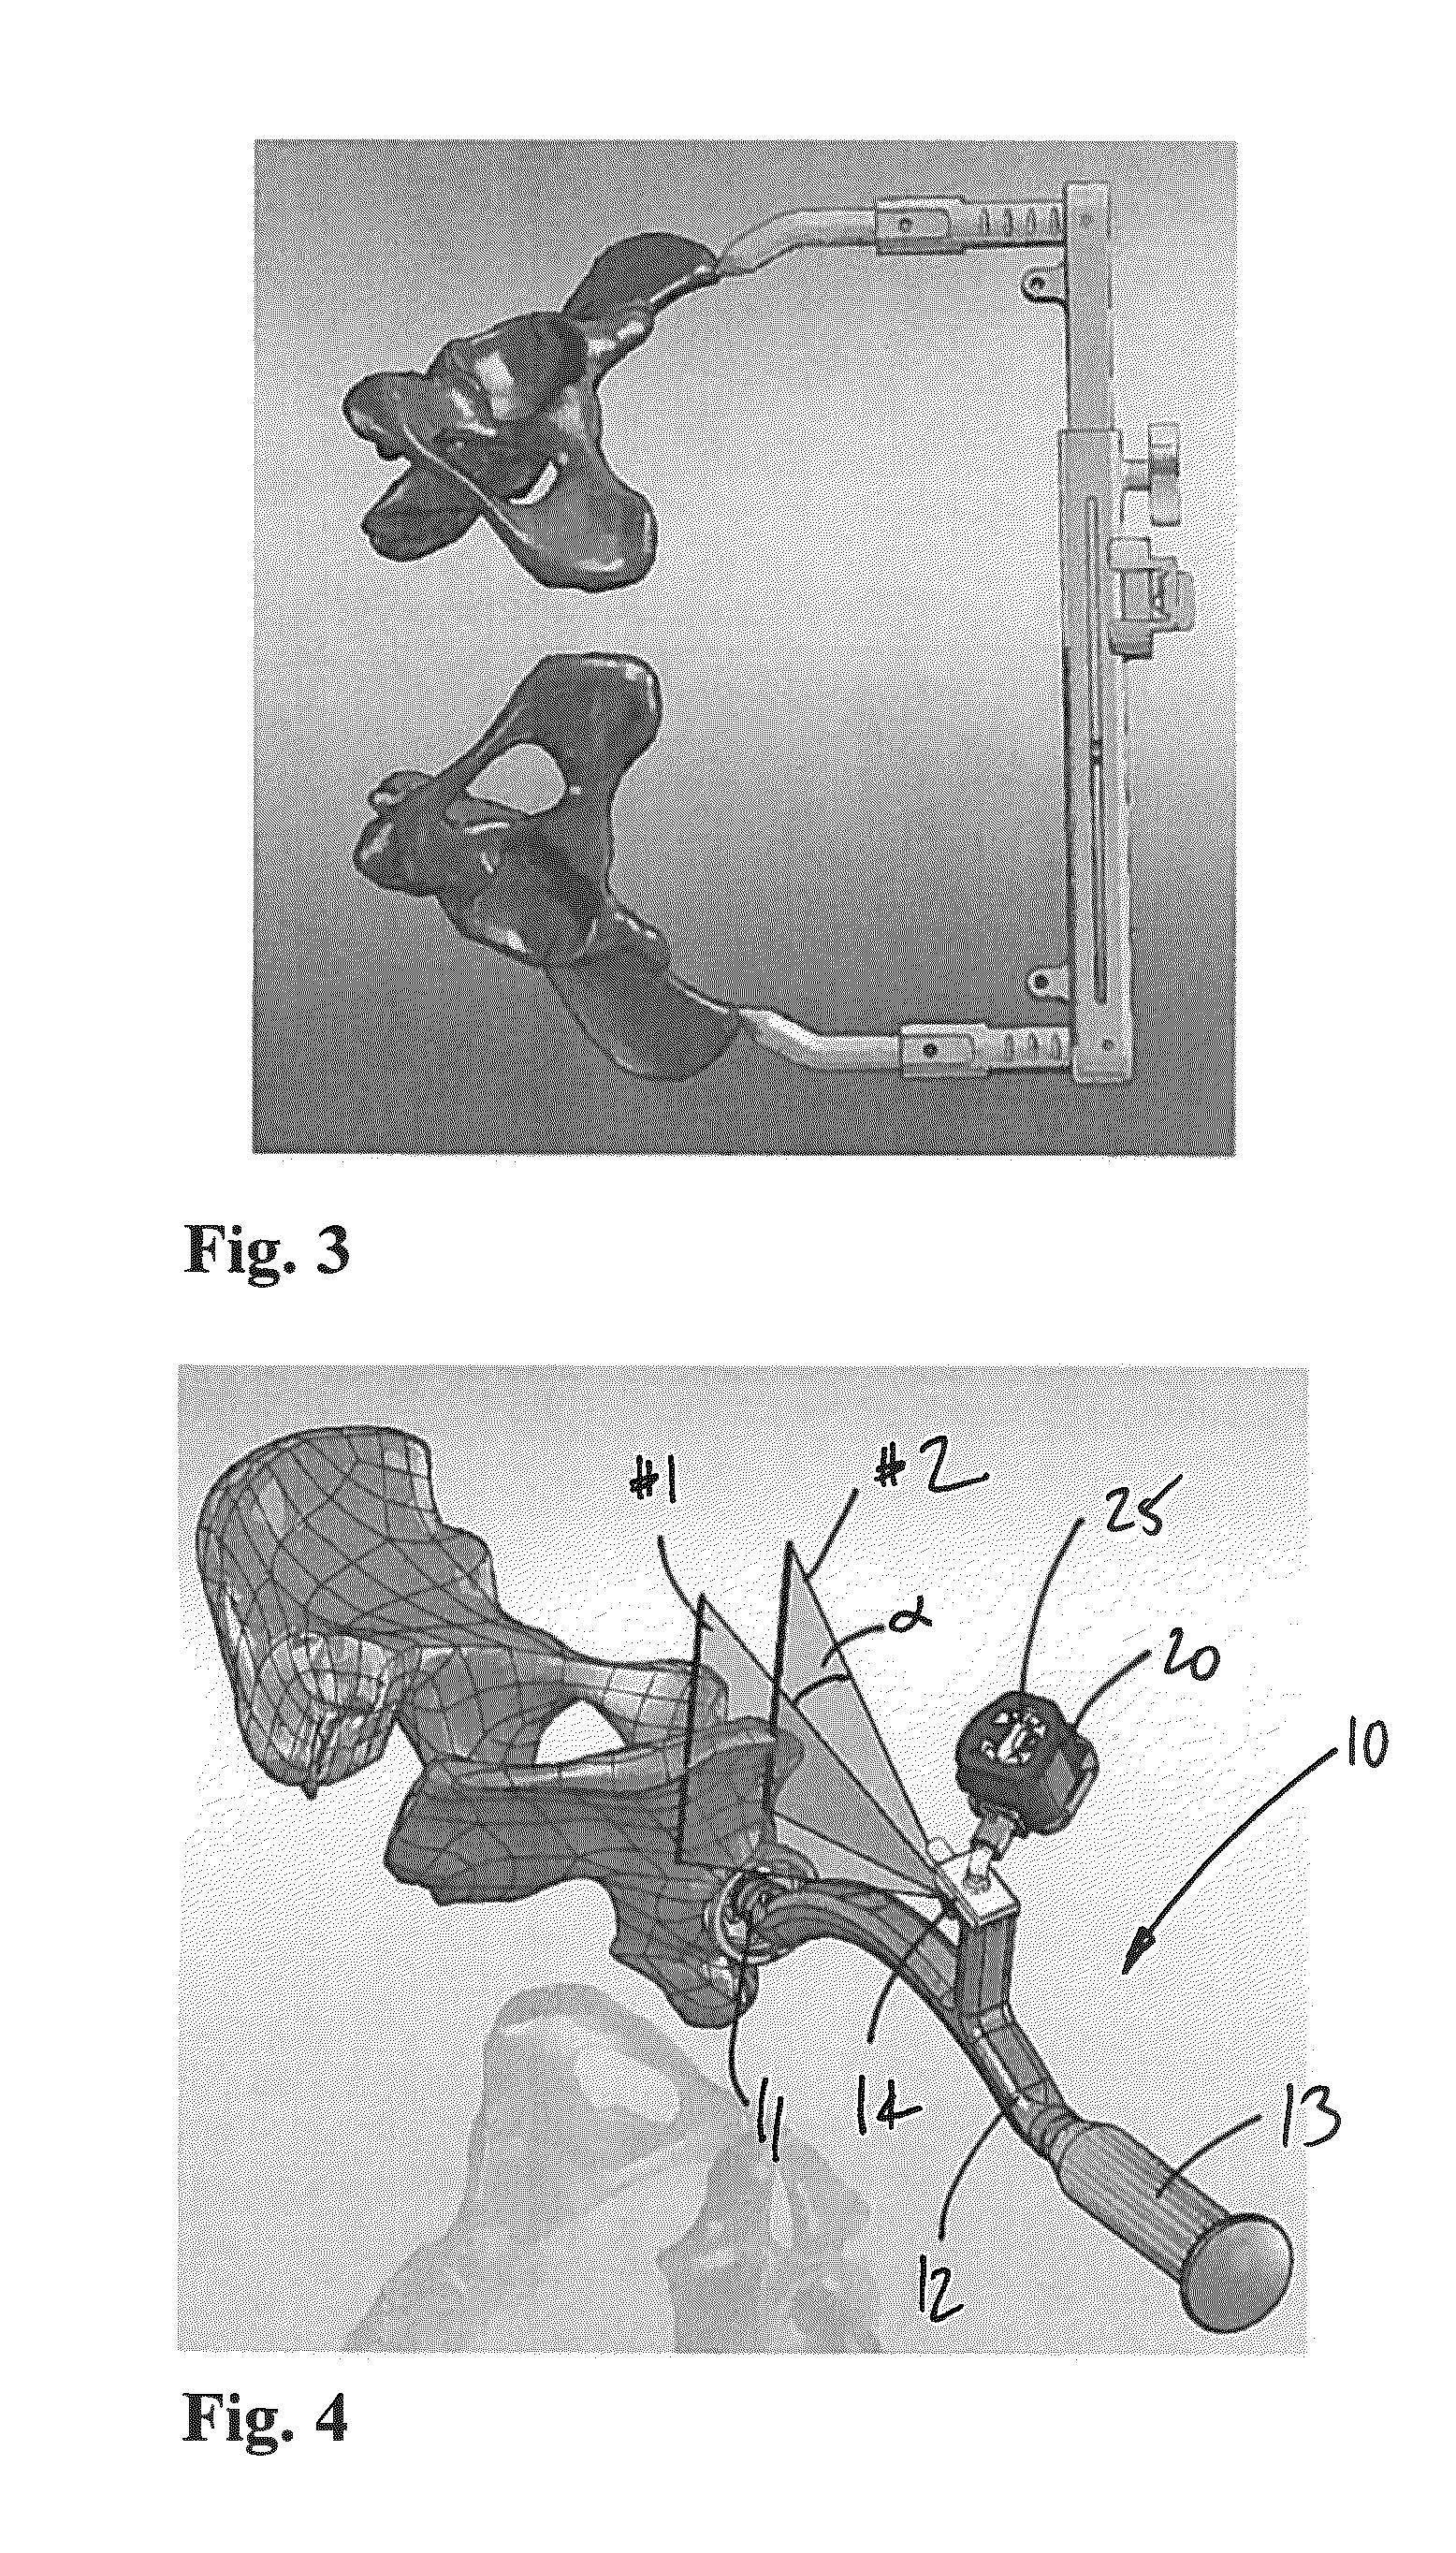 Acetabular cup prosthesis positioning instrument and method